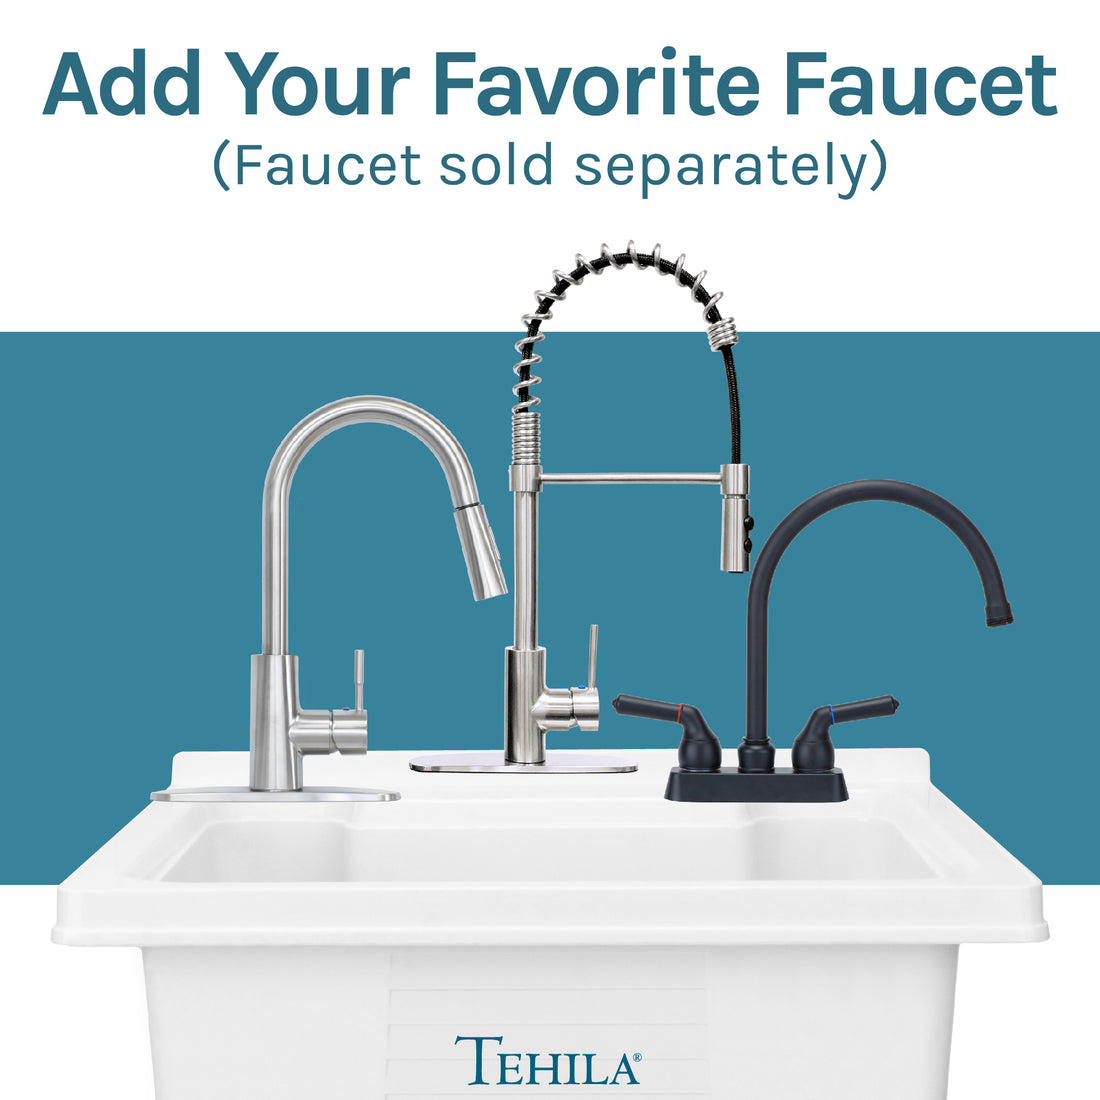 Utility Sink Add Your Favorite Faucet(Faucet sold separately)